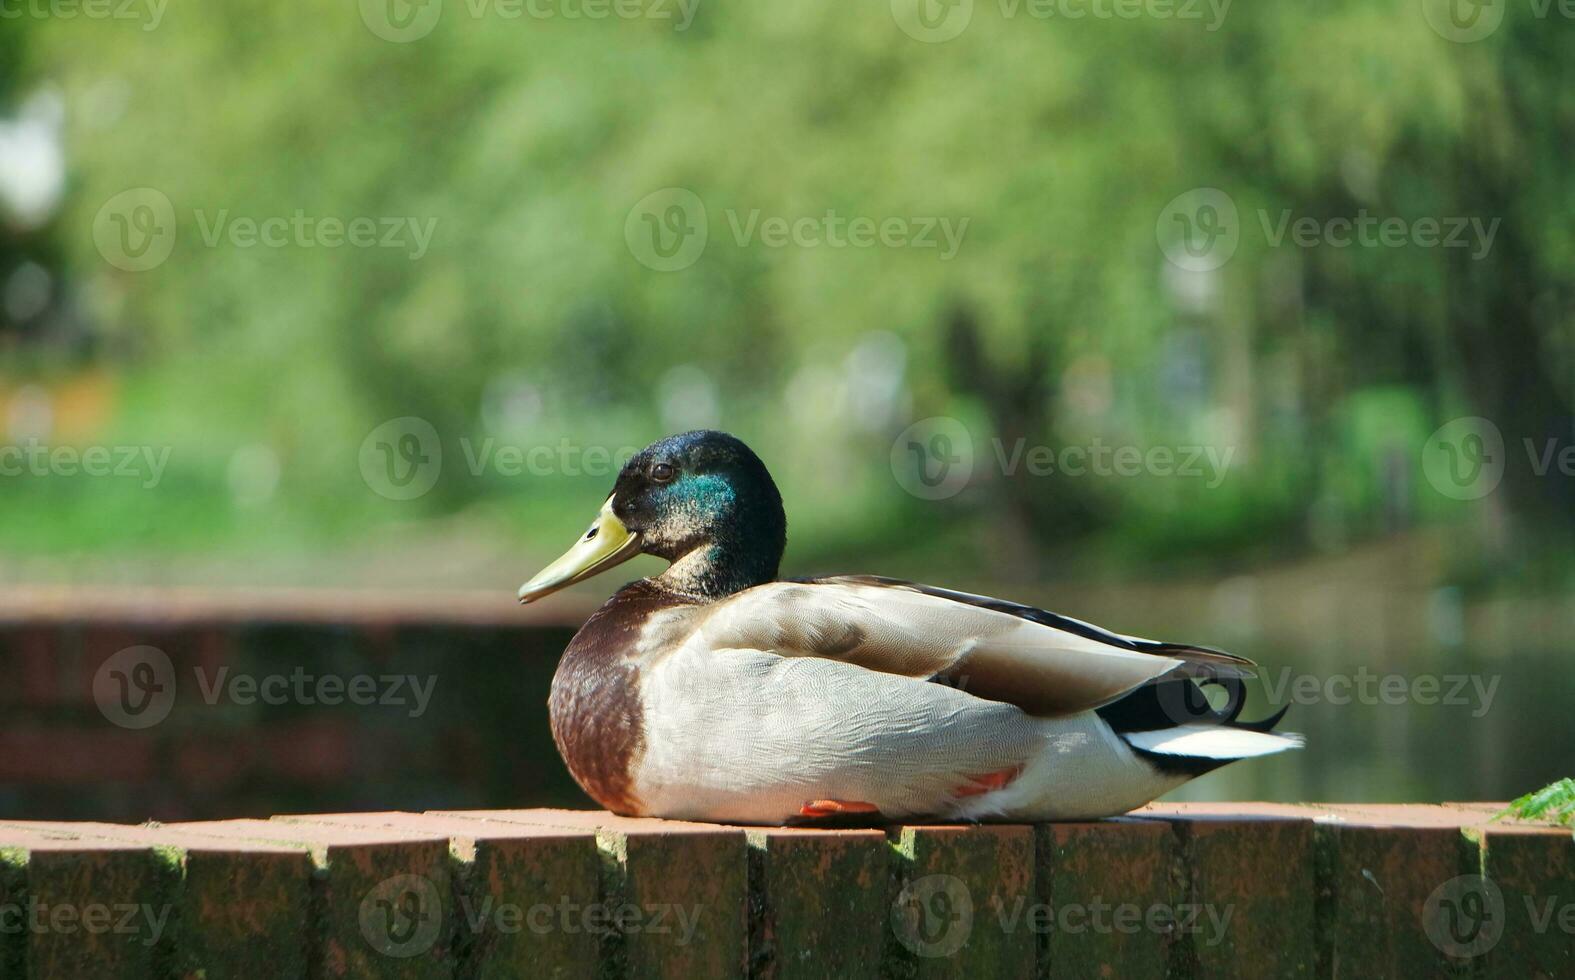 Cute Water Bird at Local Public Park's Lake of Bedford City of England Great Britain, UK. Image Was Captured on April 22nd, 2023 photo